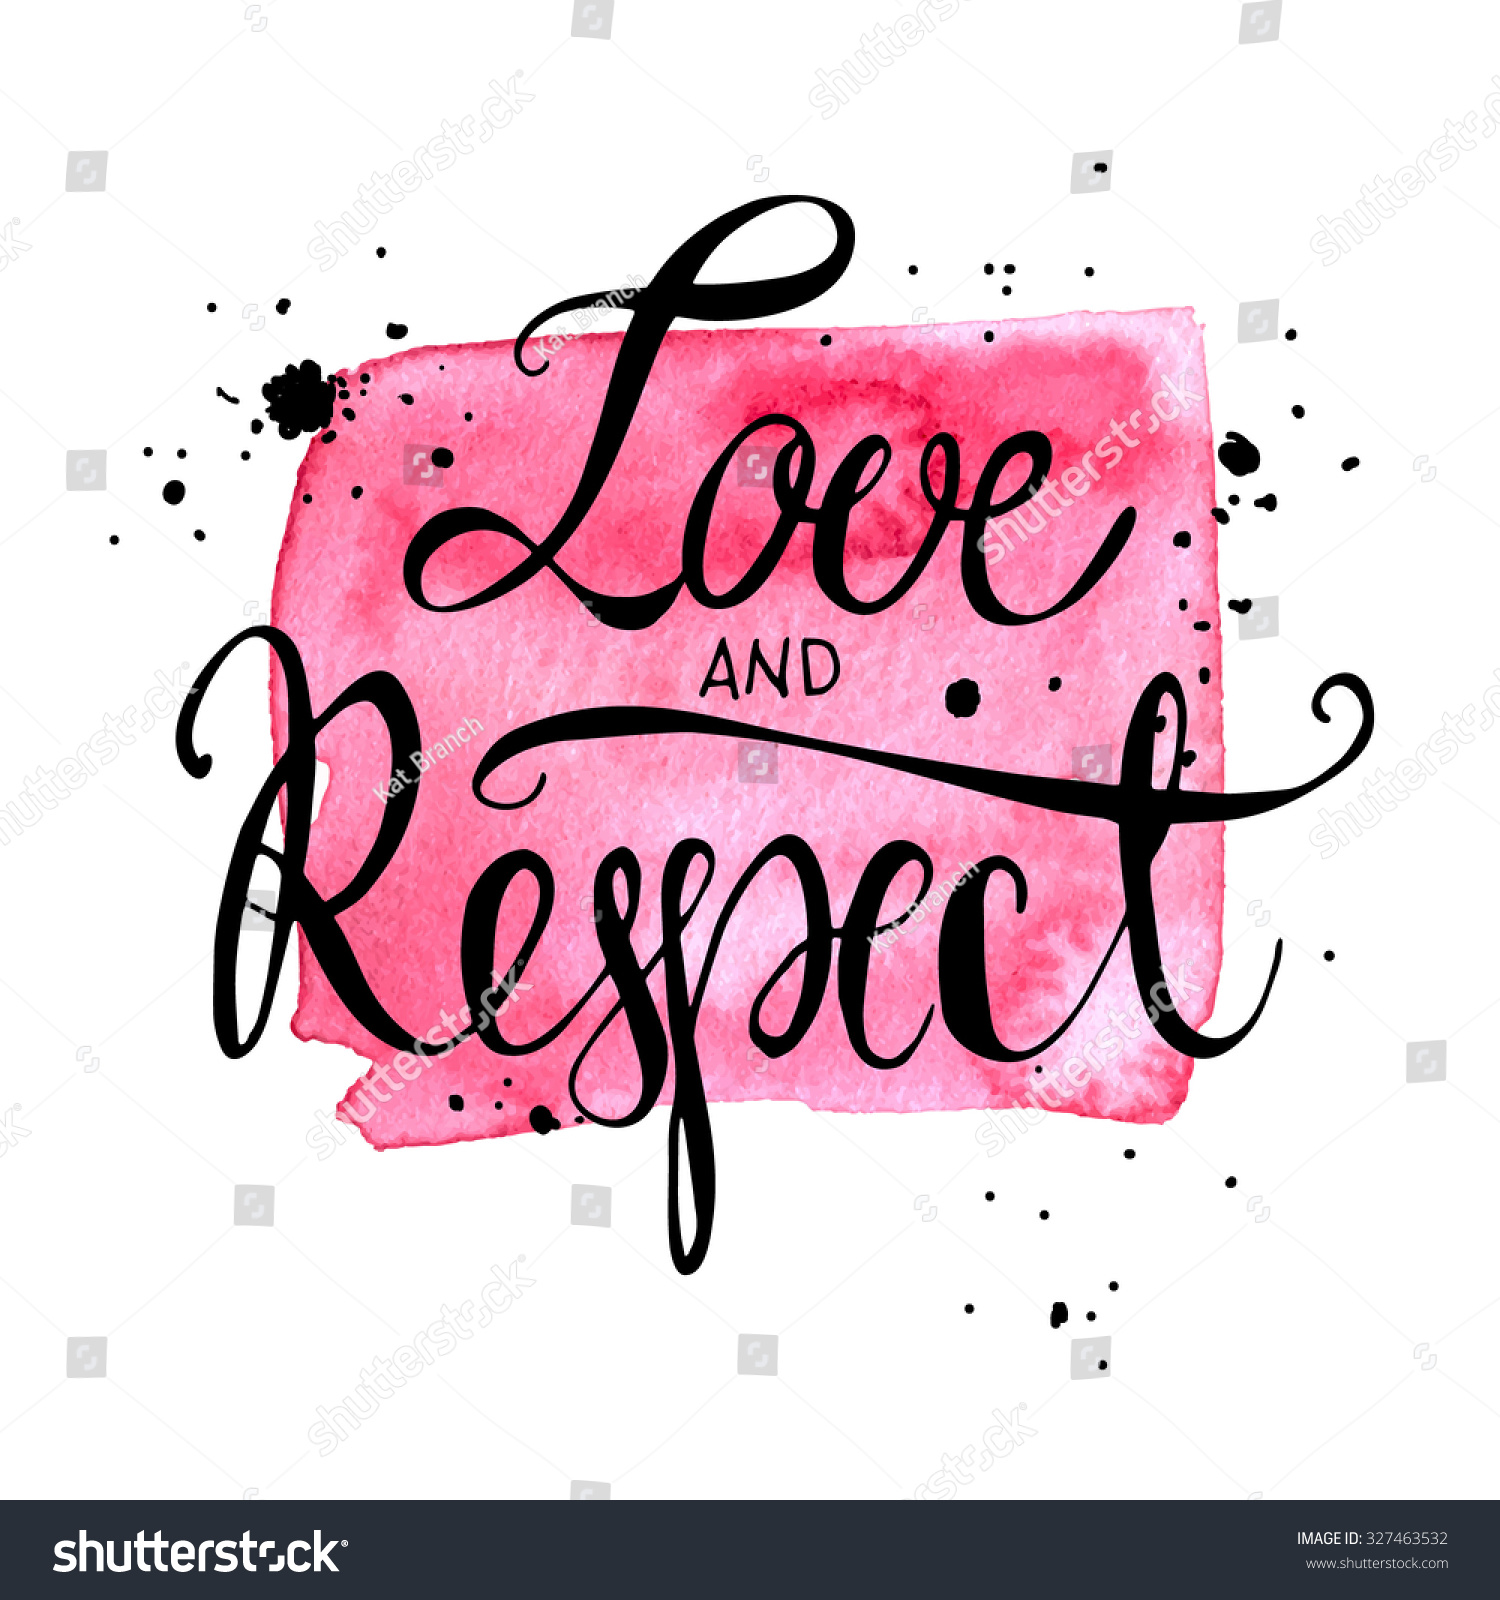 respect clipart love and respect